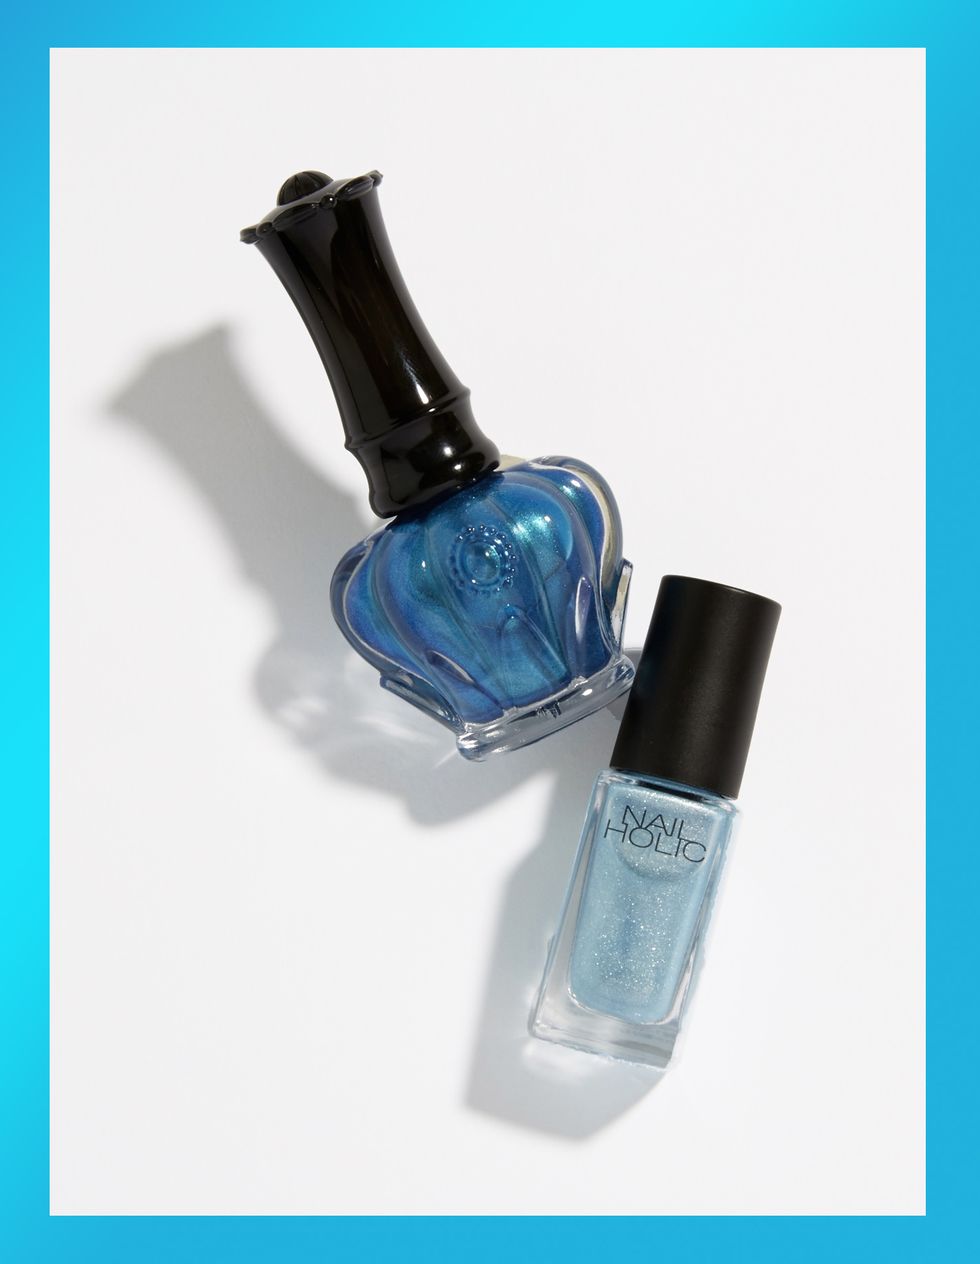 Blue, Product, Turquoise, Bottle, Liquid, Water, Nail polish, Glass bottle, Nail care, Material property, 